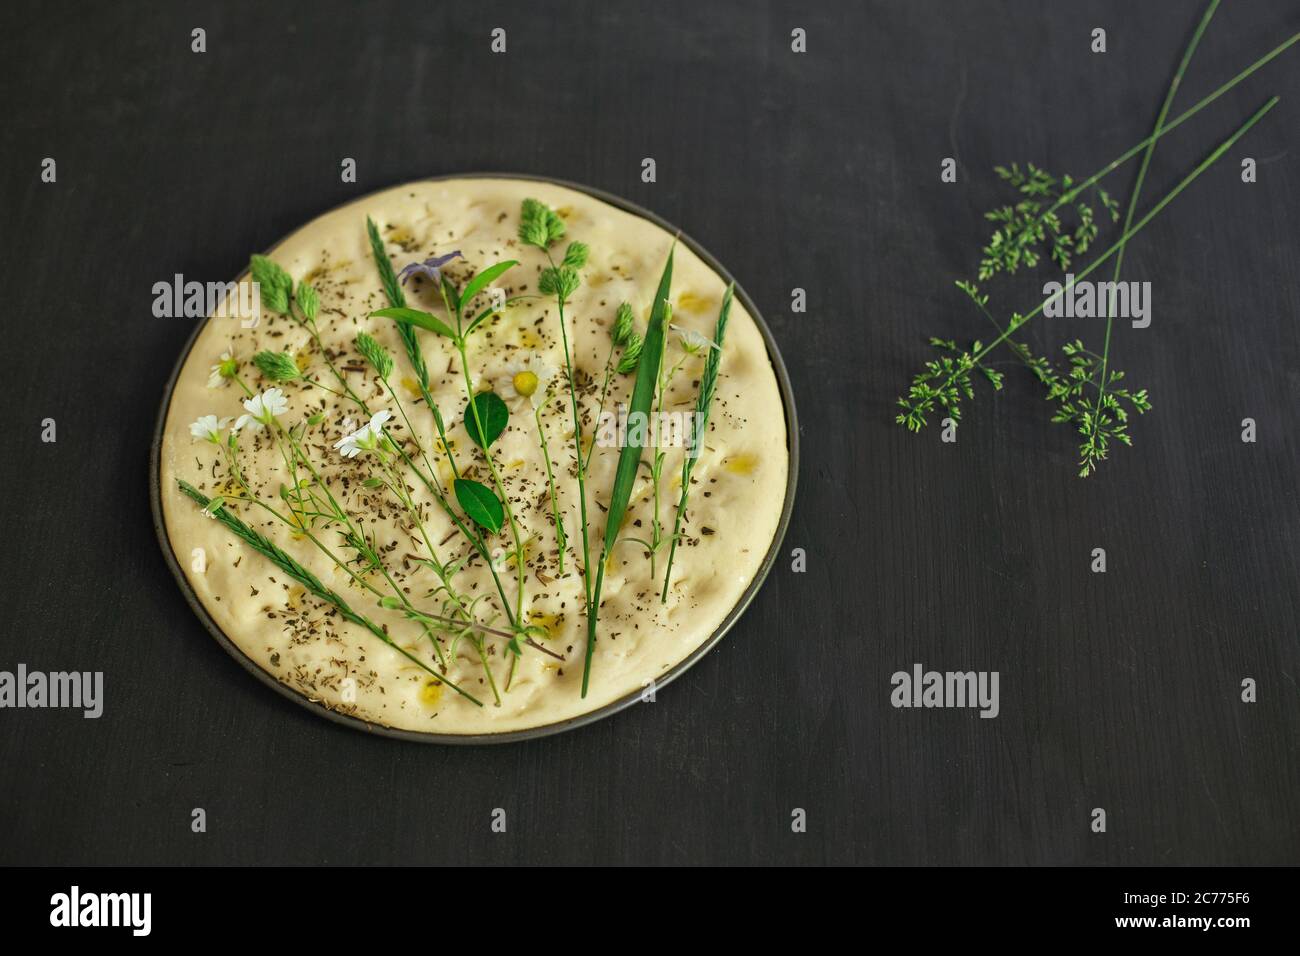 Preparing a garden flatbread with wildflowers, grasses and herbs Stock Photo